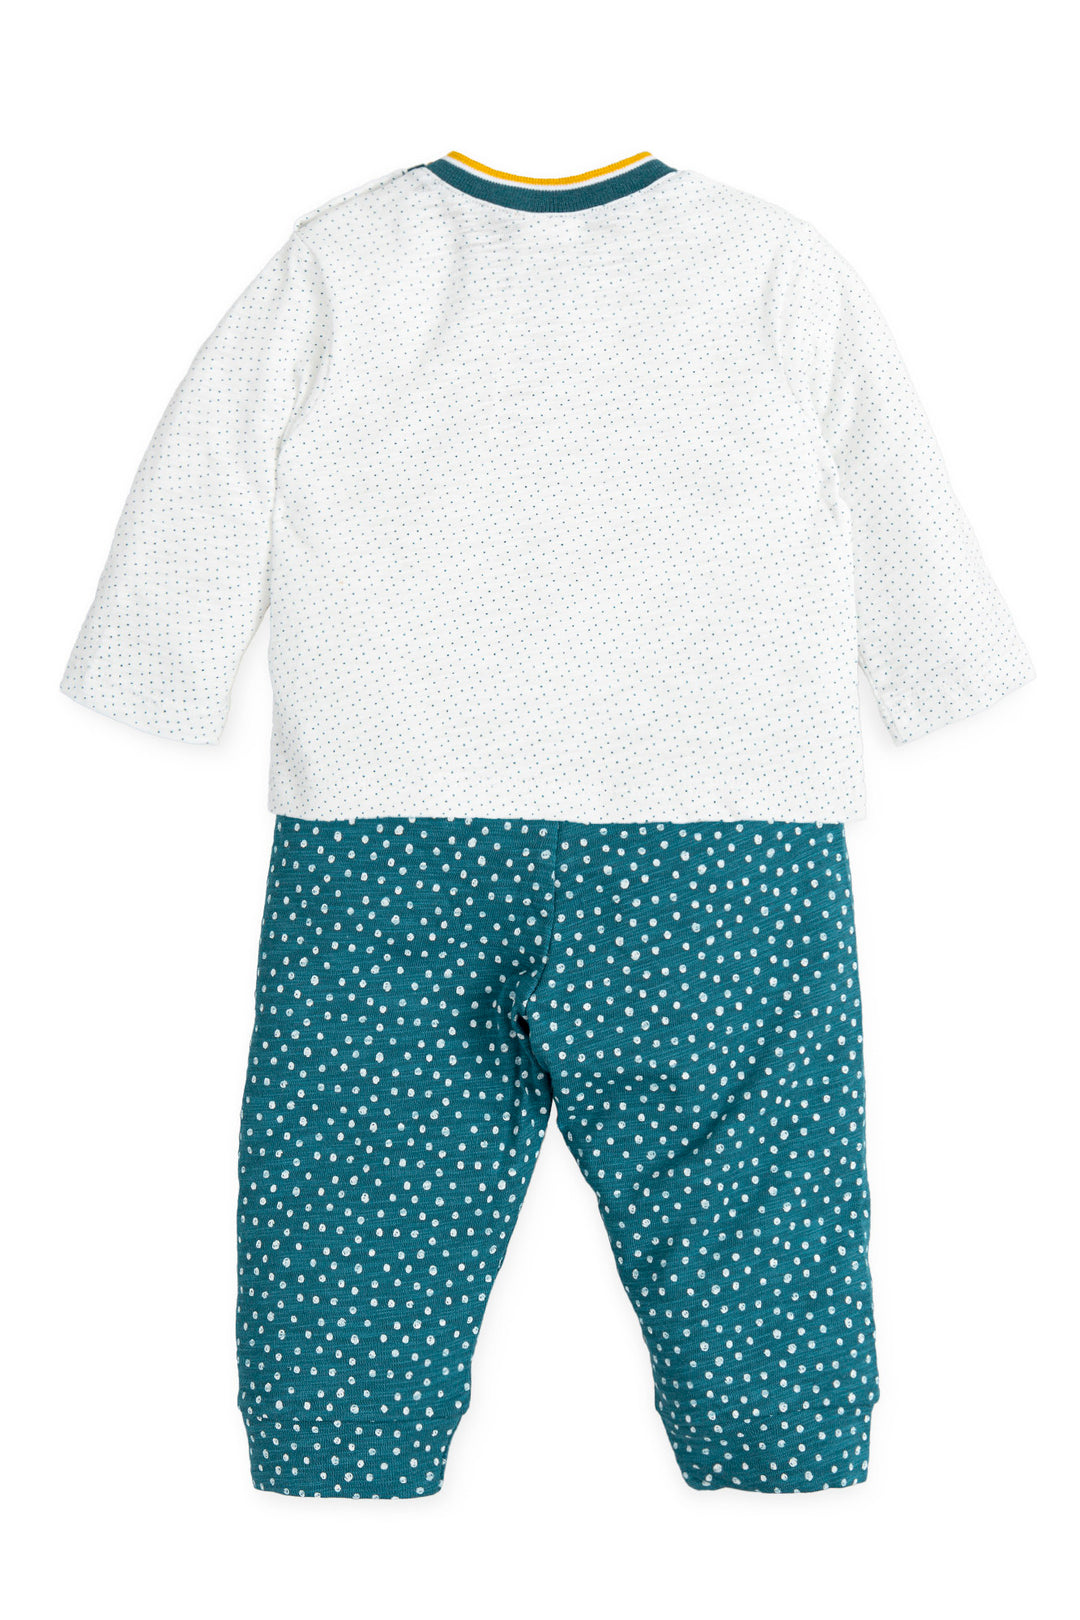 Tutto Piccolo "Cain" Teal Galaxy Print Top & Trousers | Millie and John